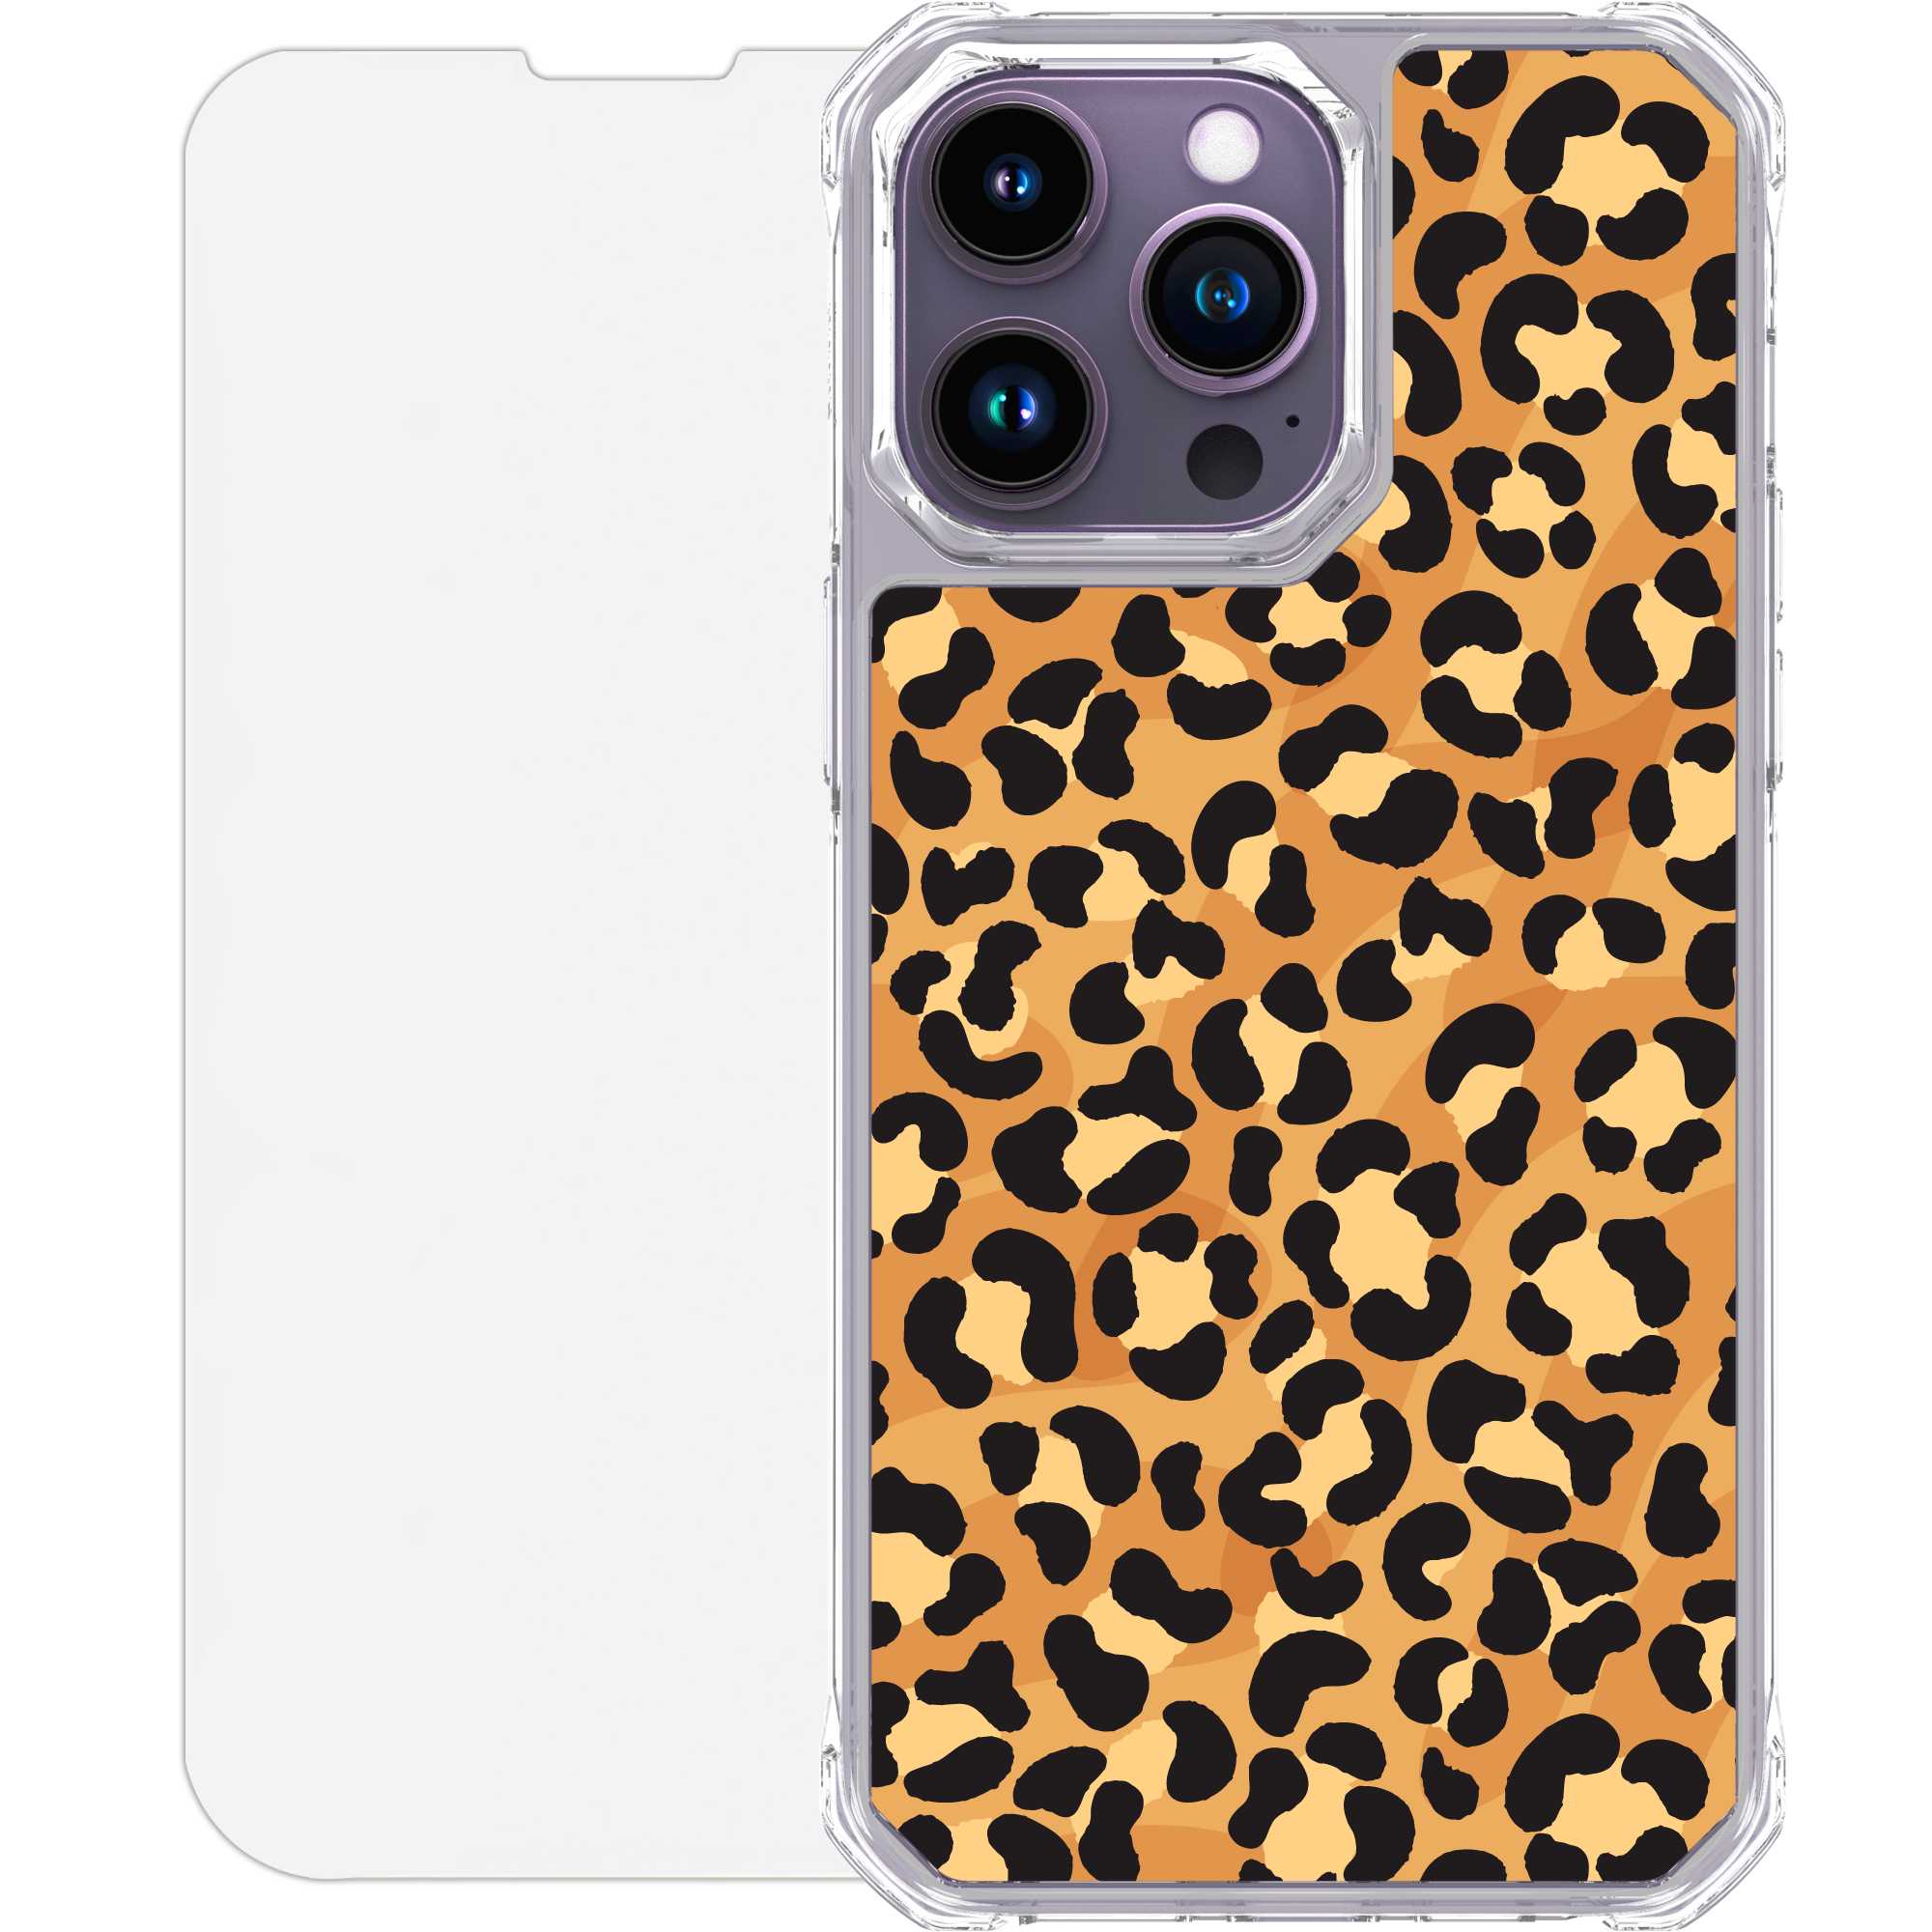 Scooch CrystalCase for iPhone 14 Pro Max ClassicLeopard Scooch CrystalCase